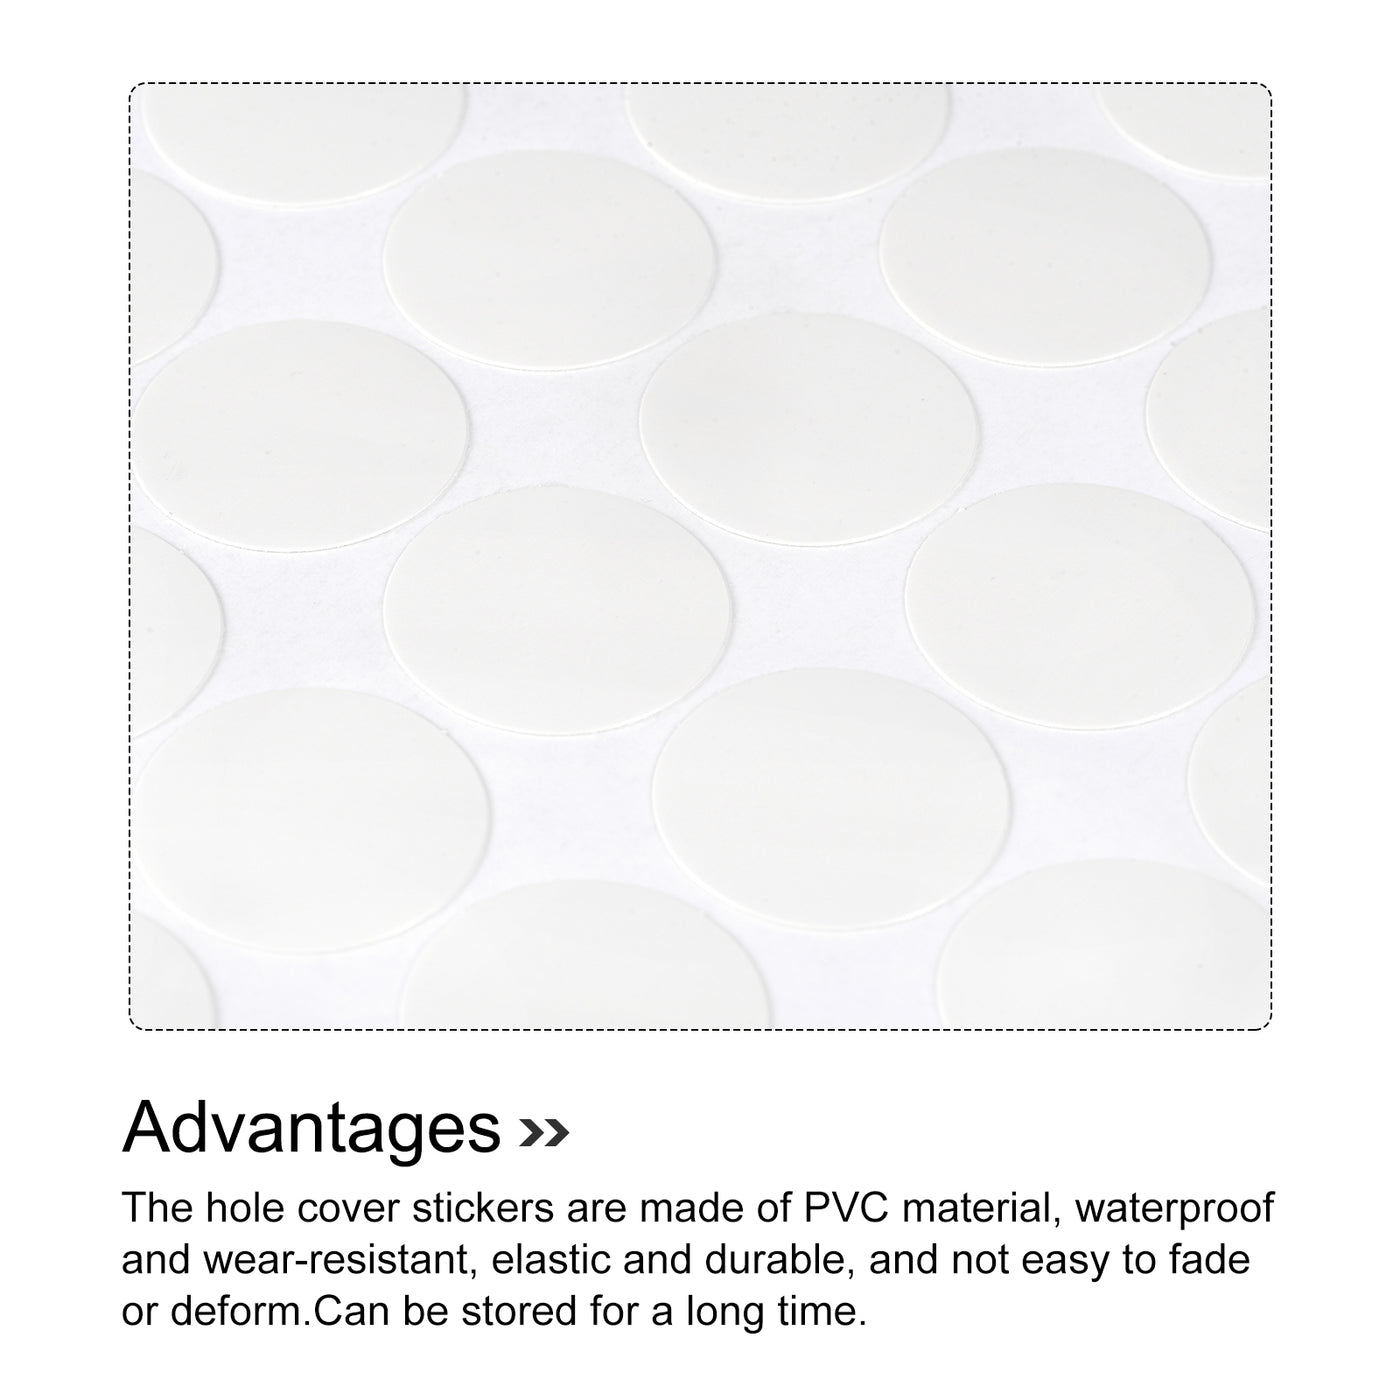 uxcell Uxcell Screw Hole Cover Stickers, 15mm Dia PVC Self Adhesive Covers Caps for Wood Furniture Cabinet Shelf Wardrobe, White 2 Sheet/192pcs